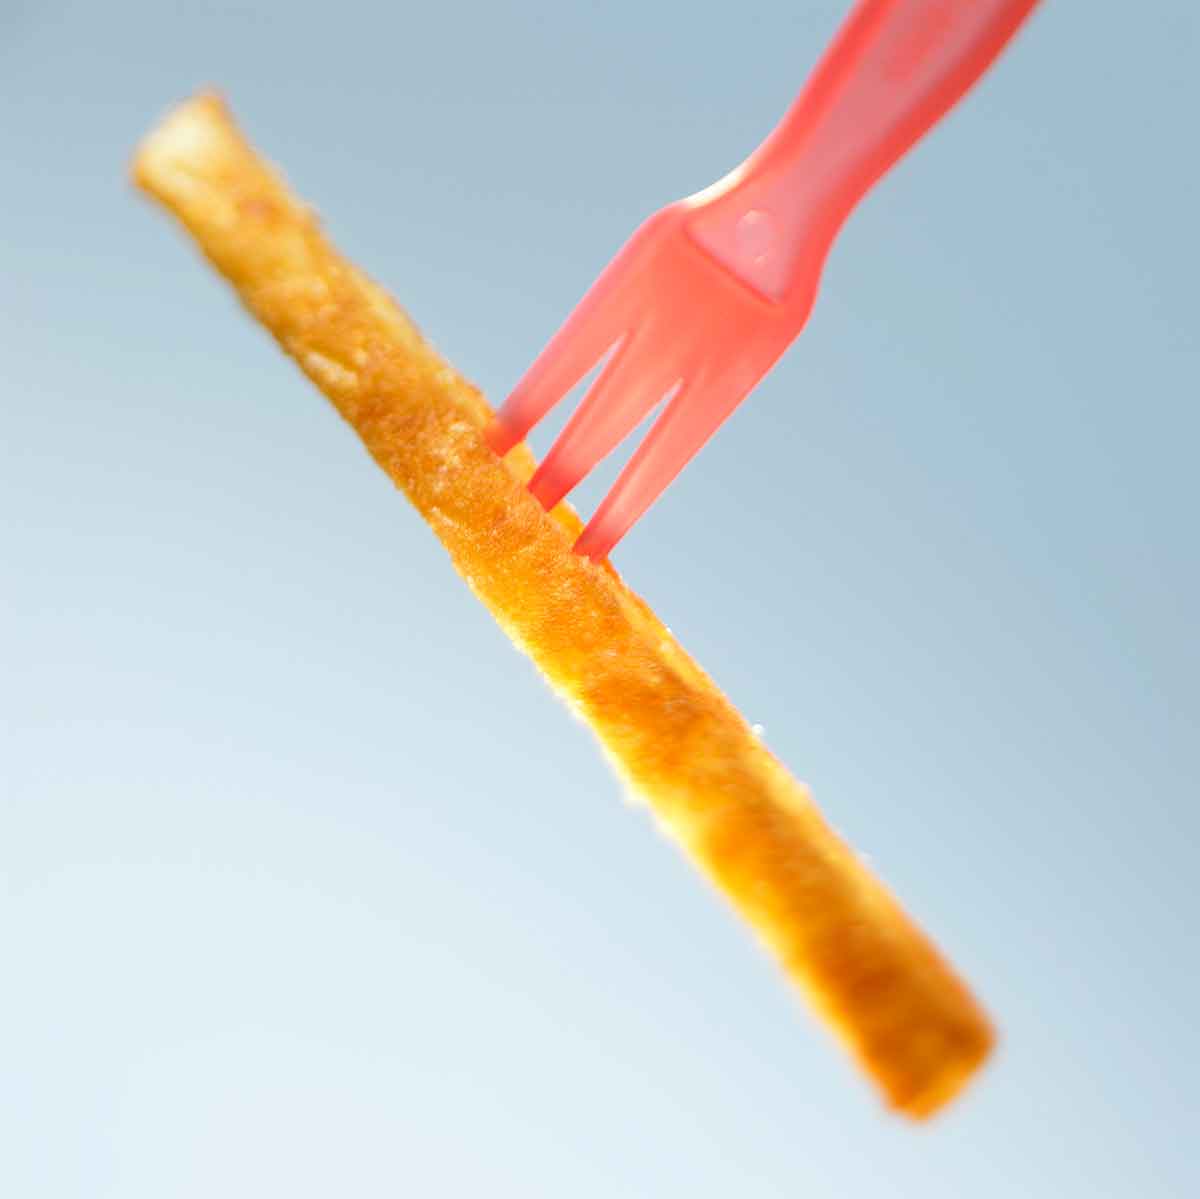 French fries images